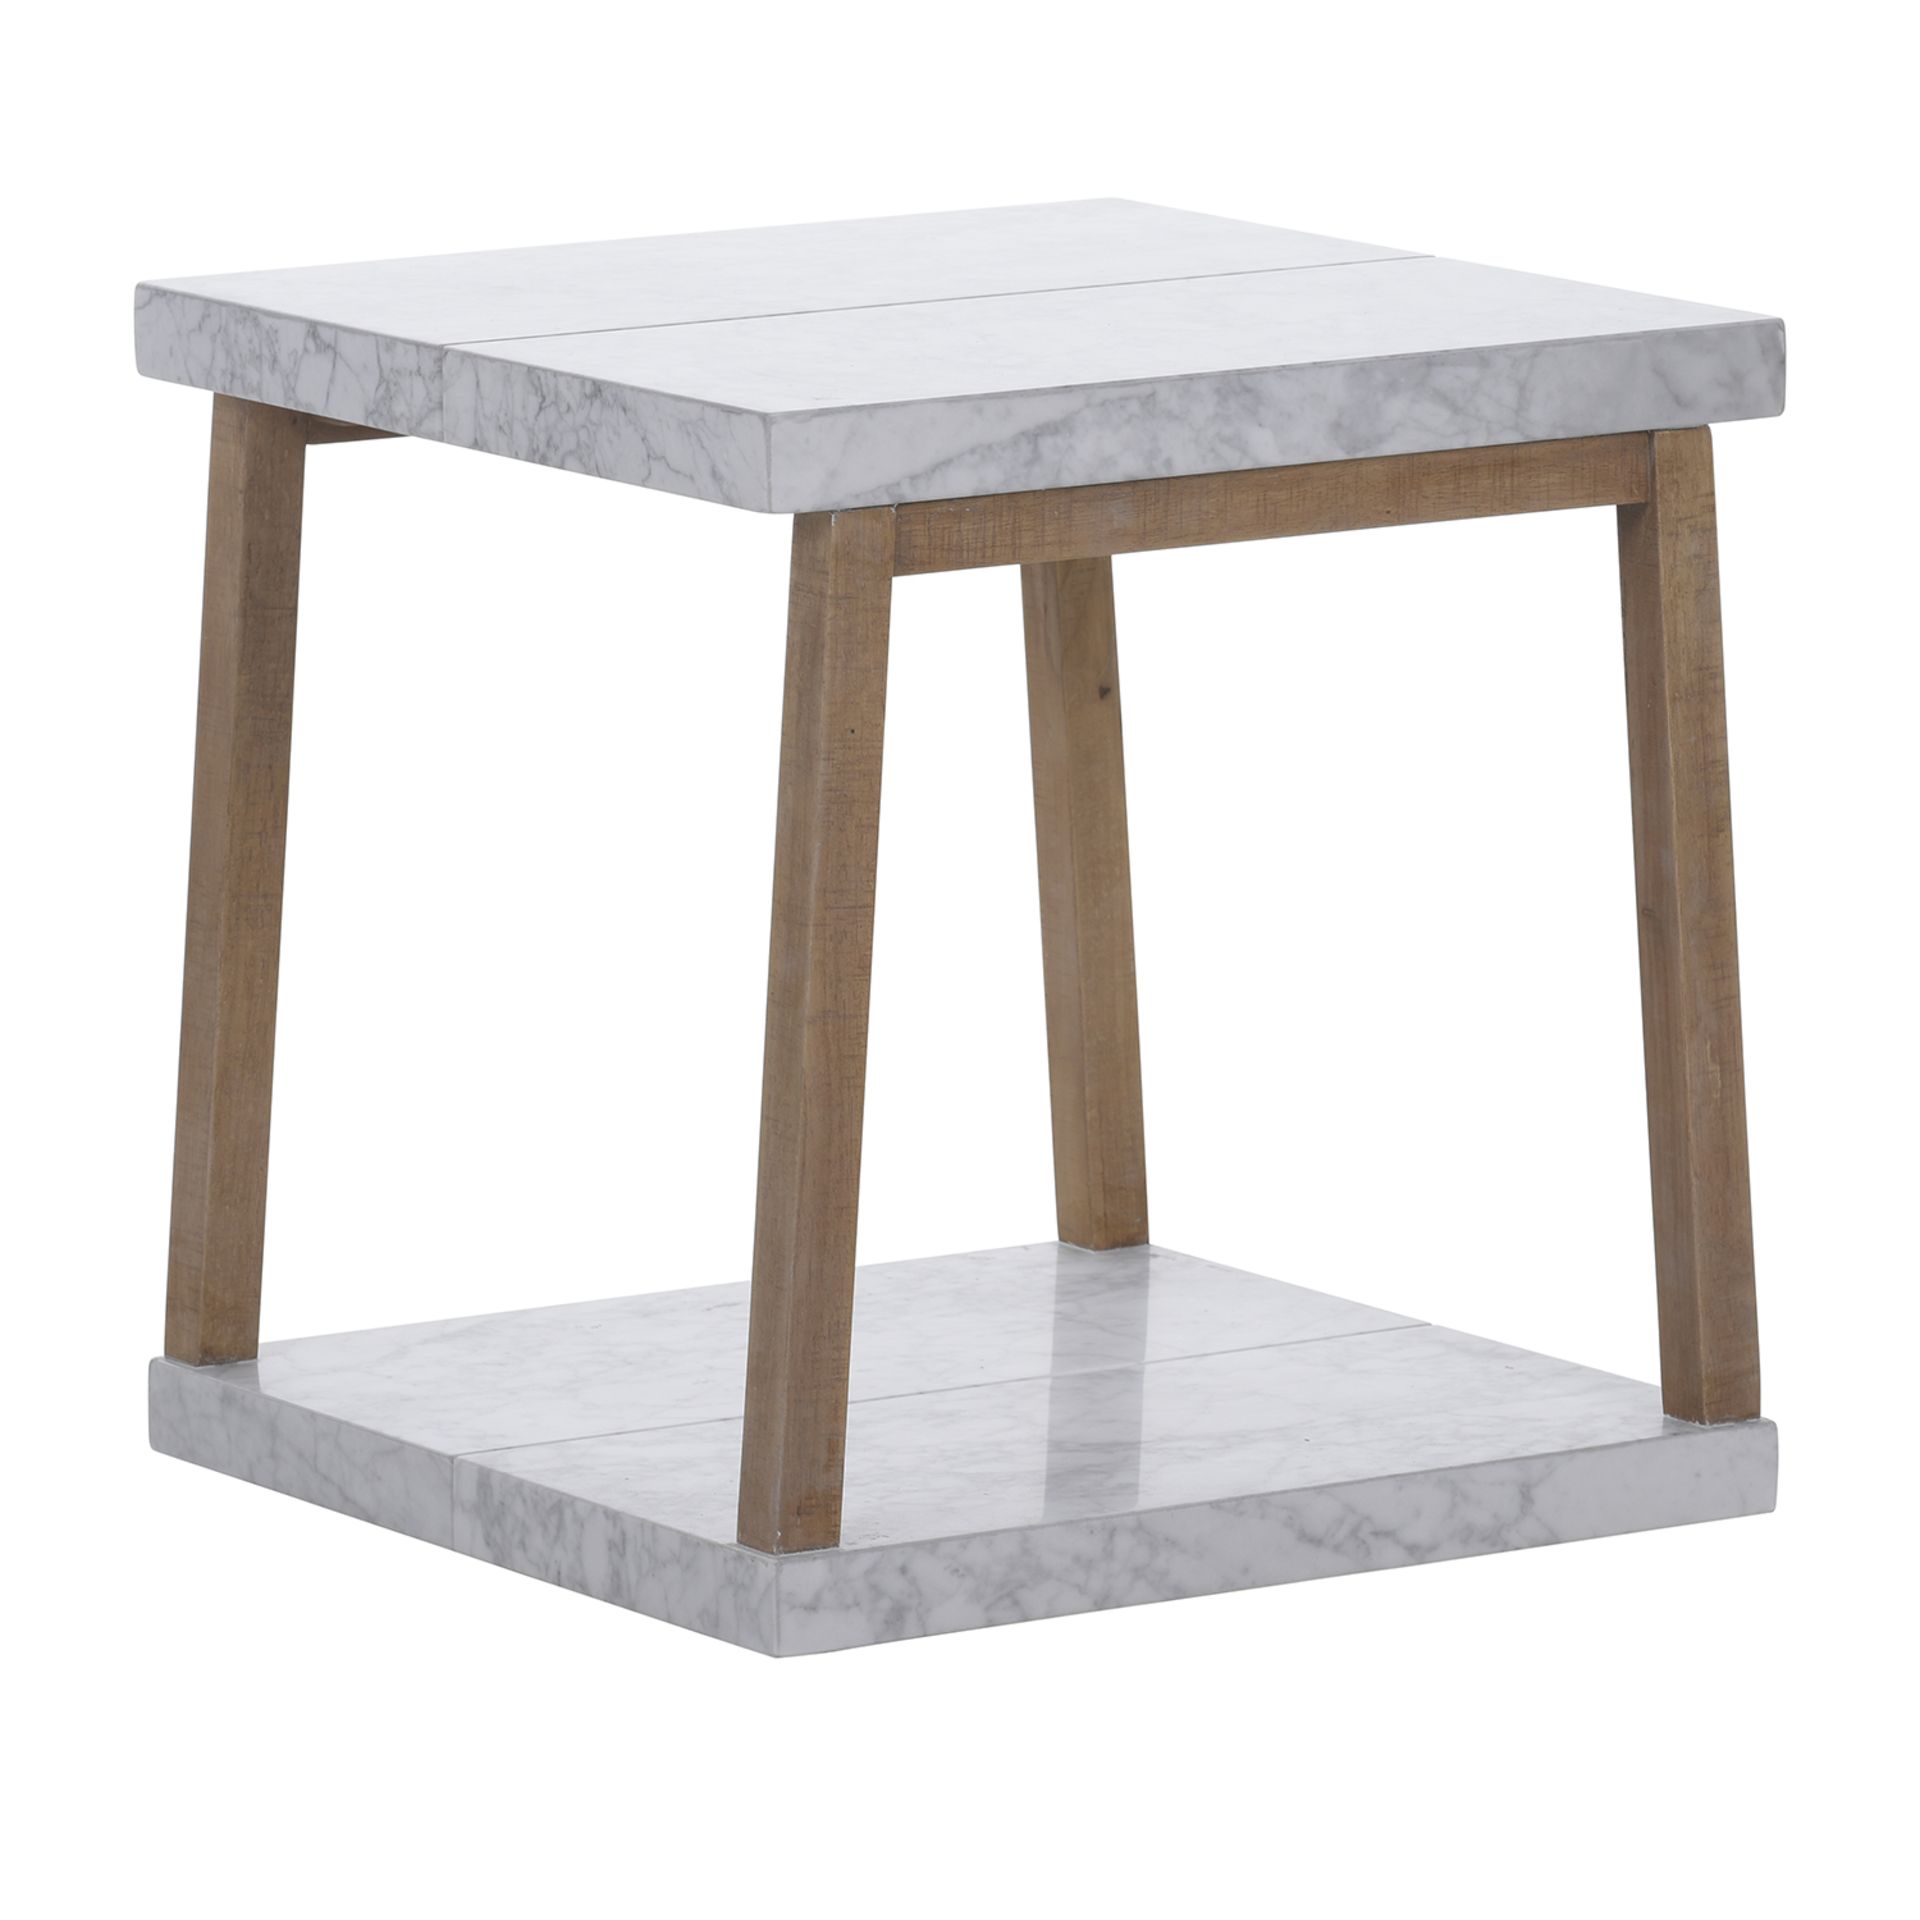 Valencia Side Table Marble White Honed Top and Rustic Wood Frame 50 x 50 x 50 cm RRP £700